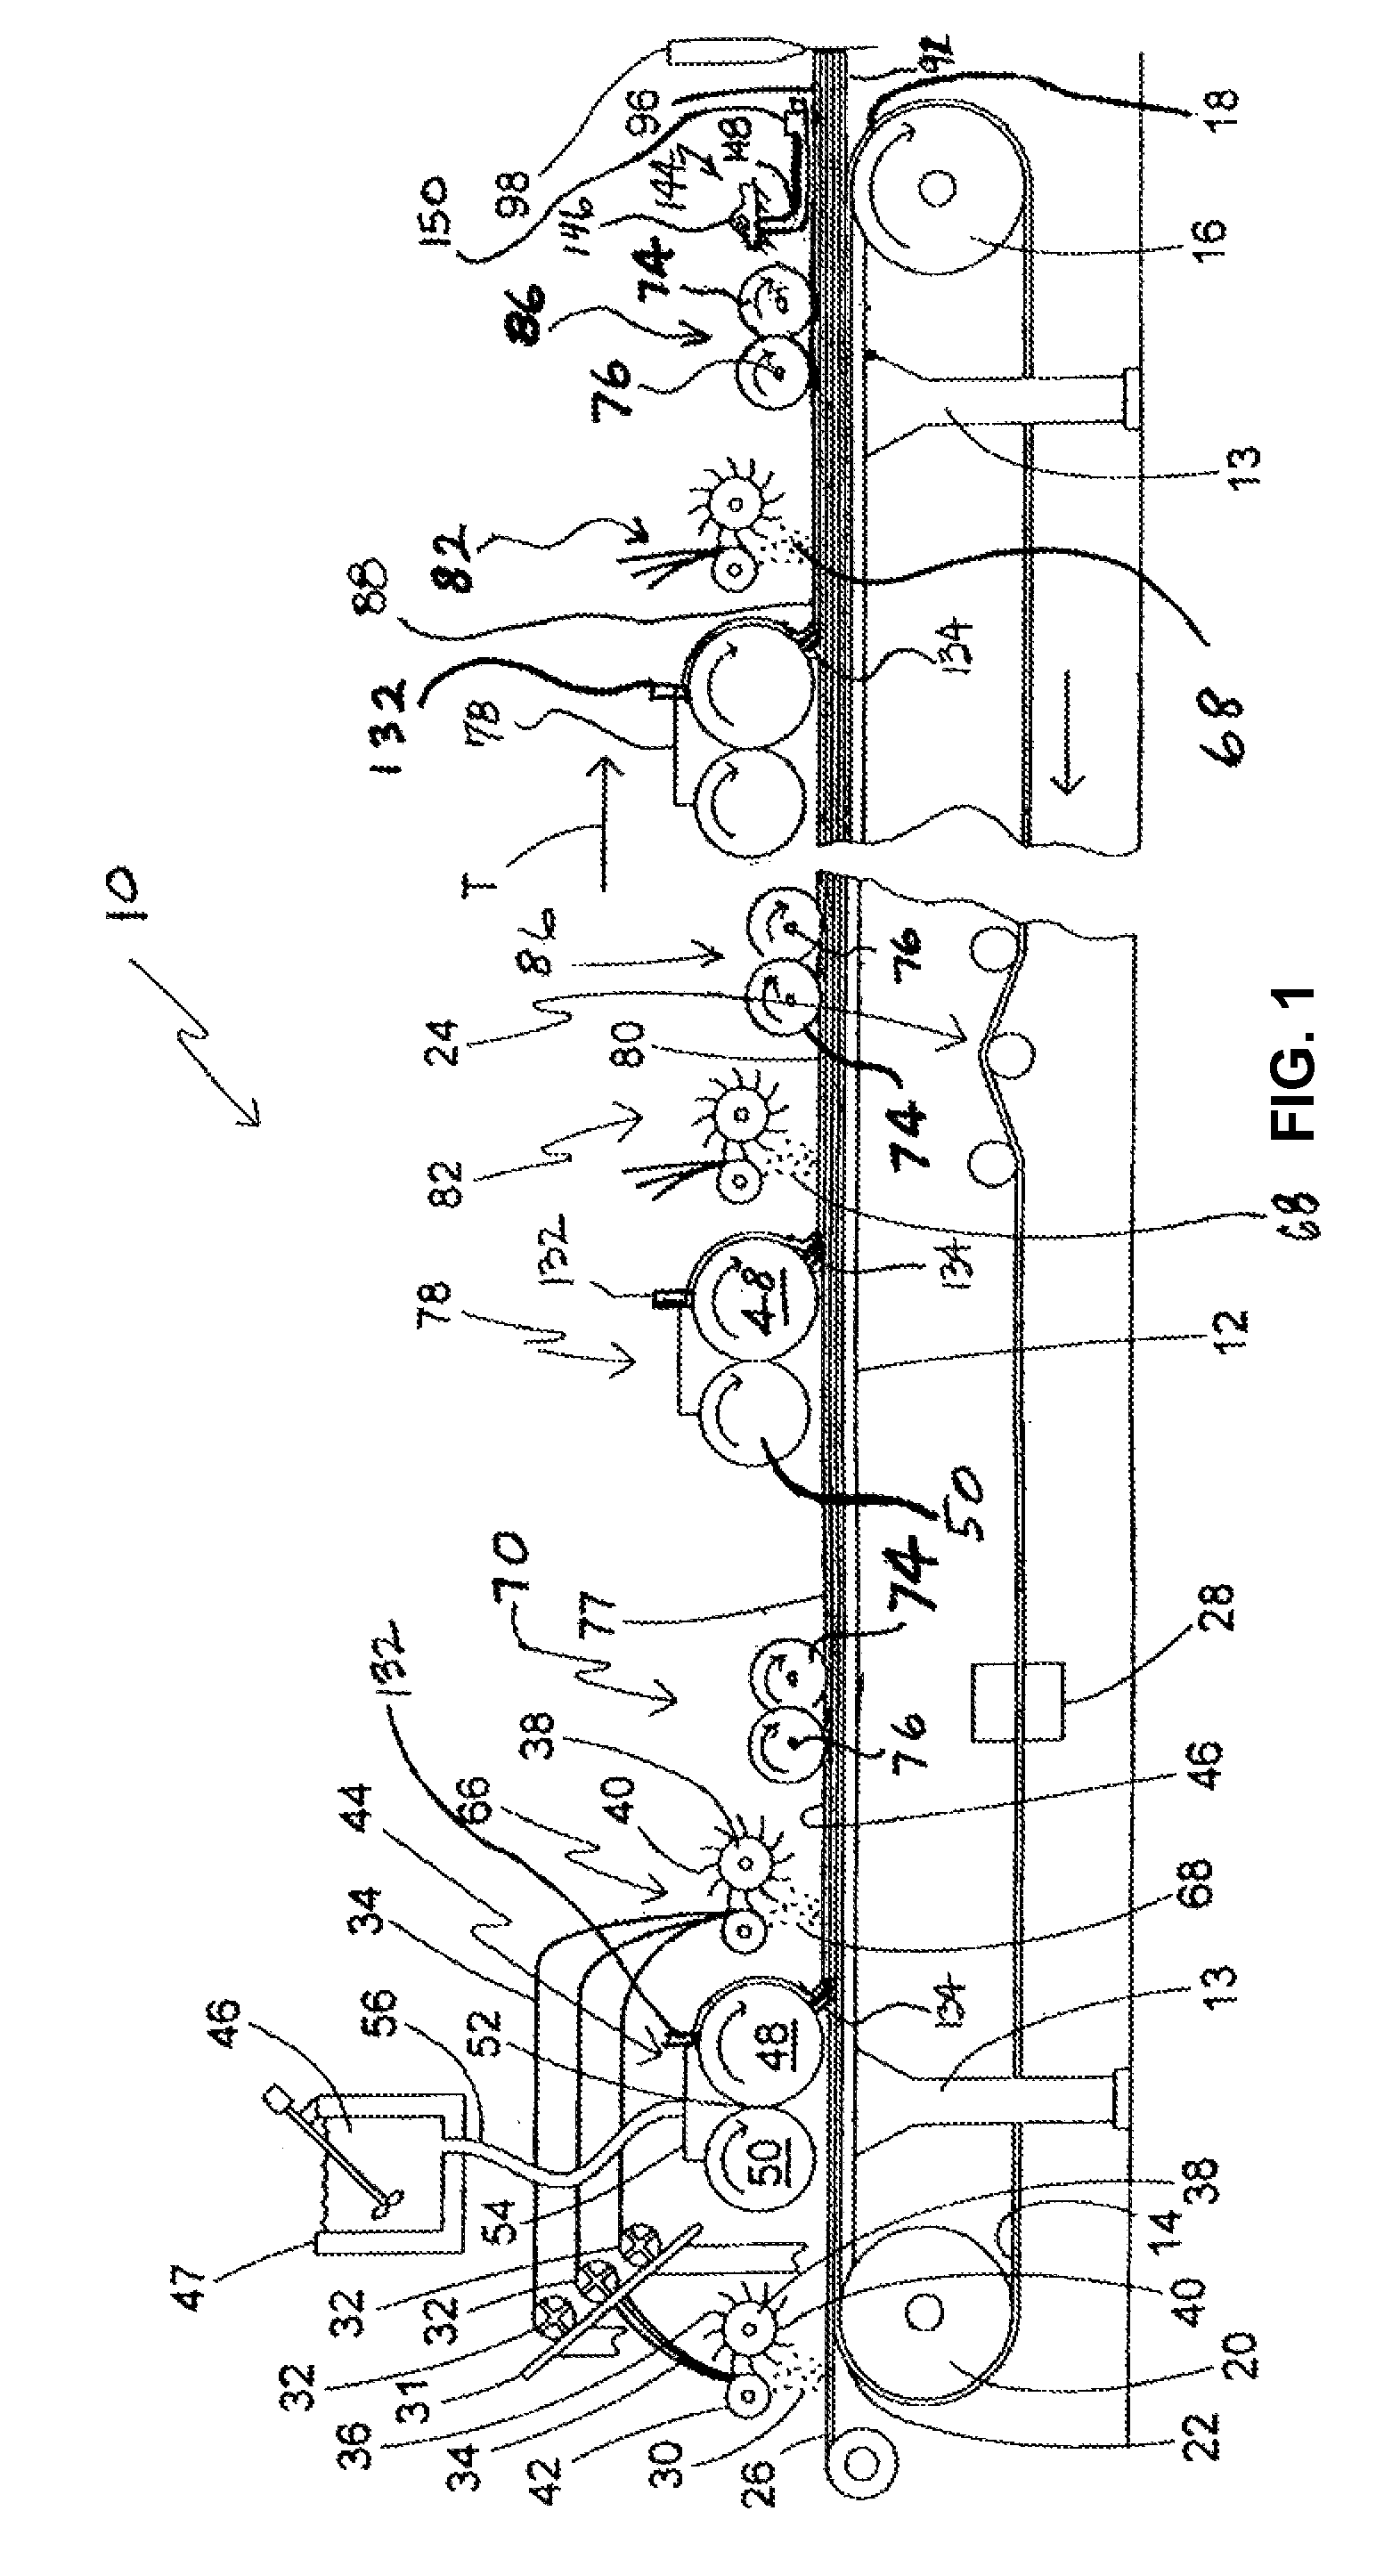 Process and apparatus for feeding cementitious slurry for fiber-reinforced structural cement panels